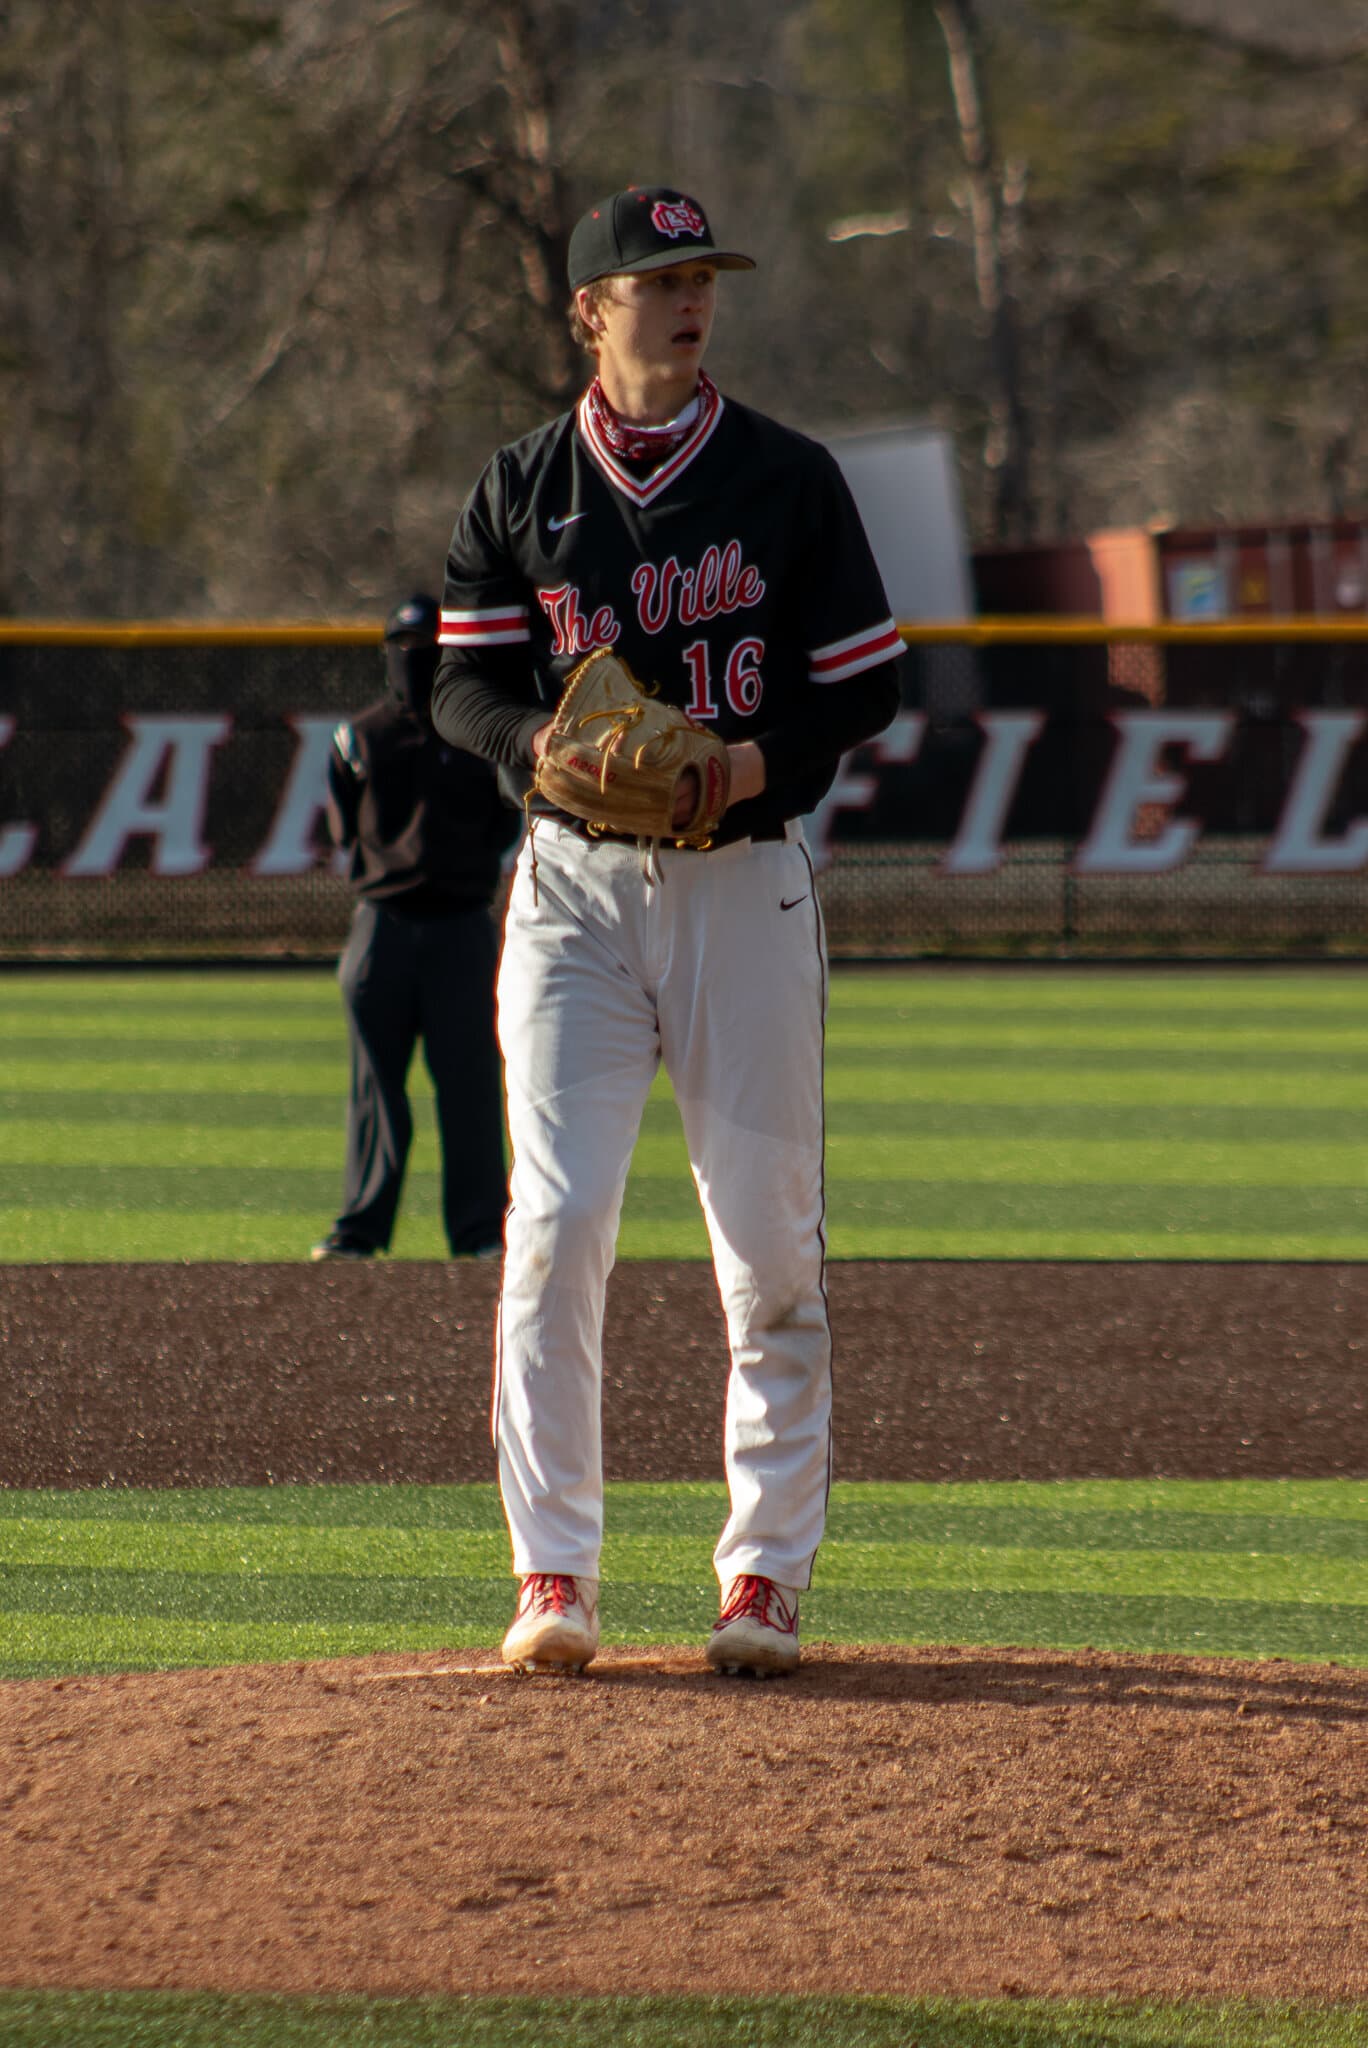 Senior pitcher Christian Ryder stands on the mound for North Greenville.